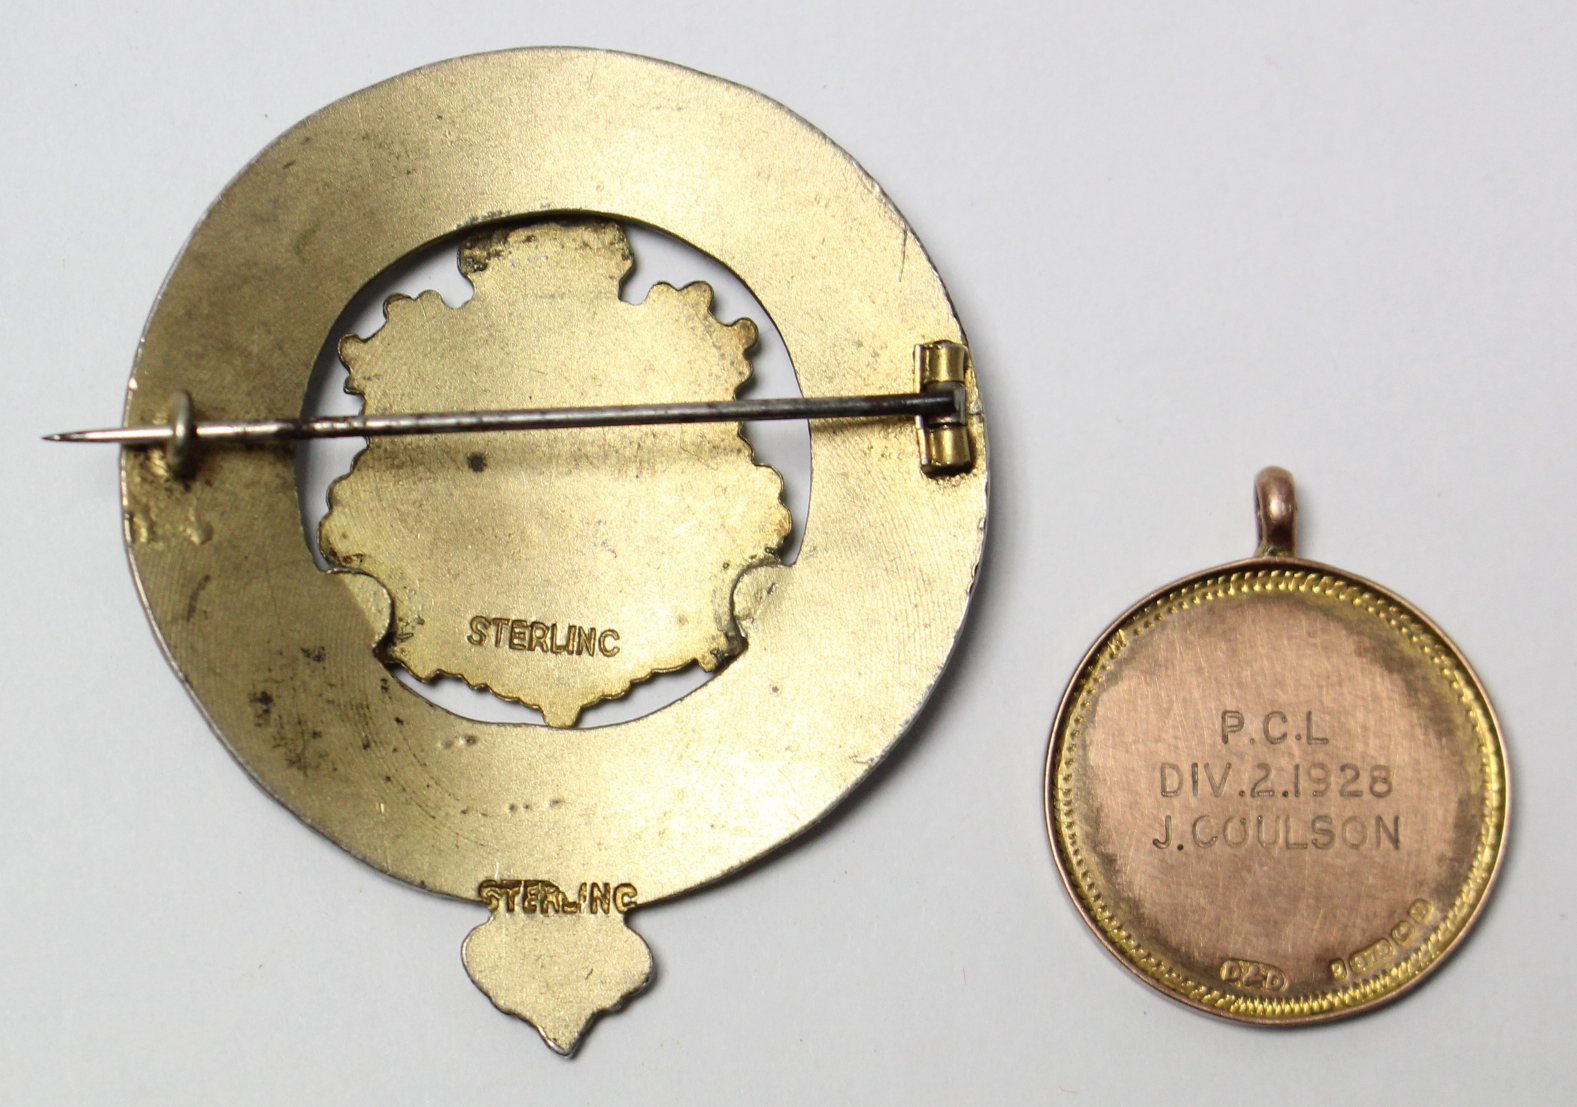 A 1920’s 9ct gold enamelled model awarded to “P.C.L. J. COULSON DIV 2, 1928”; & a sterling silver - Image 2 of 2